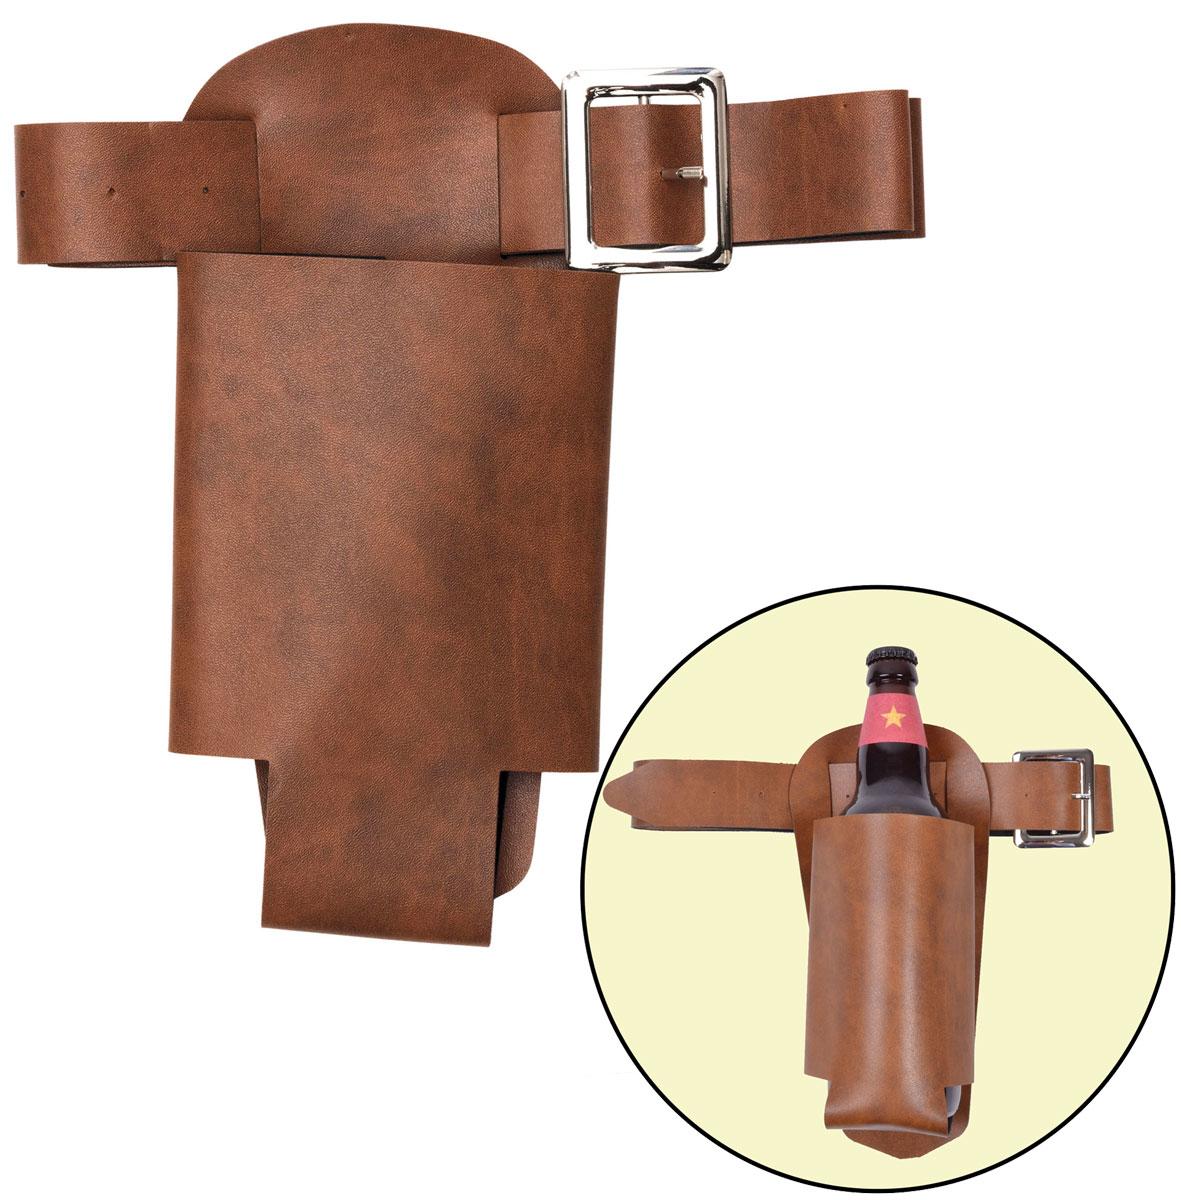 Bottle Holster with Belt alternative to traditional gun slingers belt and holster; BA2155 available here at Karnival Costumes online party shop